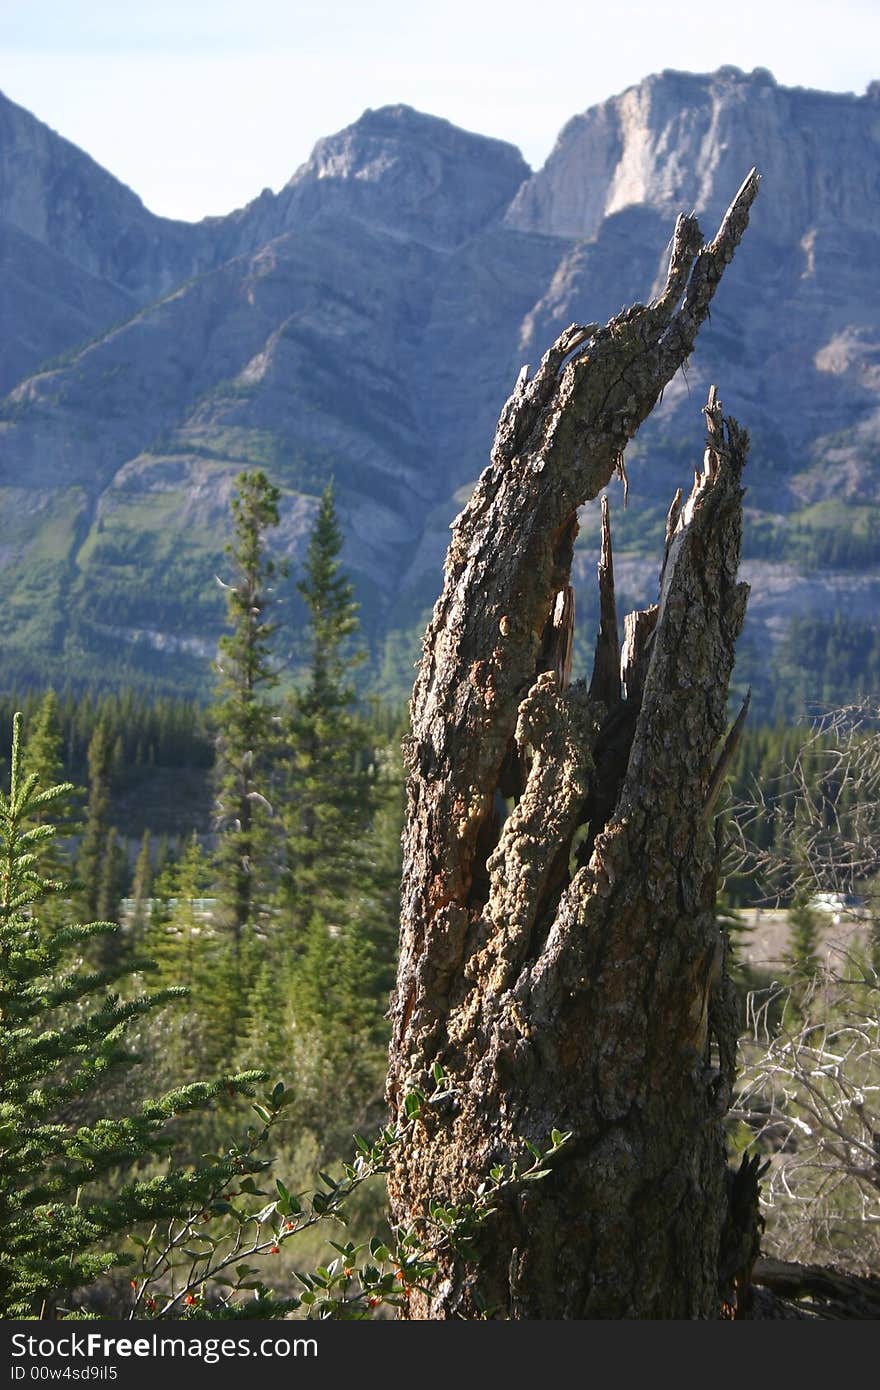 The twisted and shattered trunk of a dead tree at the Mistaya Howse confluence in the Alberta Rockies. The twisted and shattered trunk of a dead tree at the Mistaya Howse confluence in the Alberta Rockies